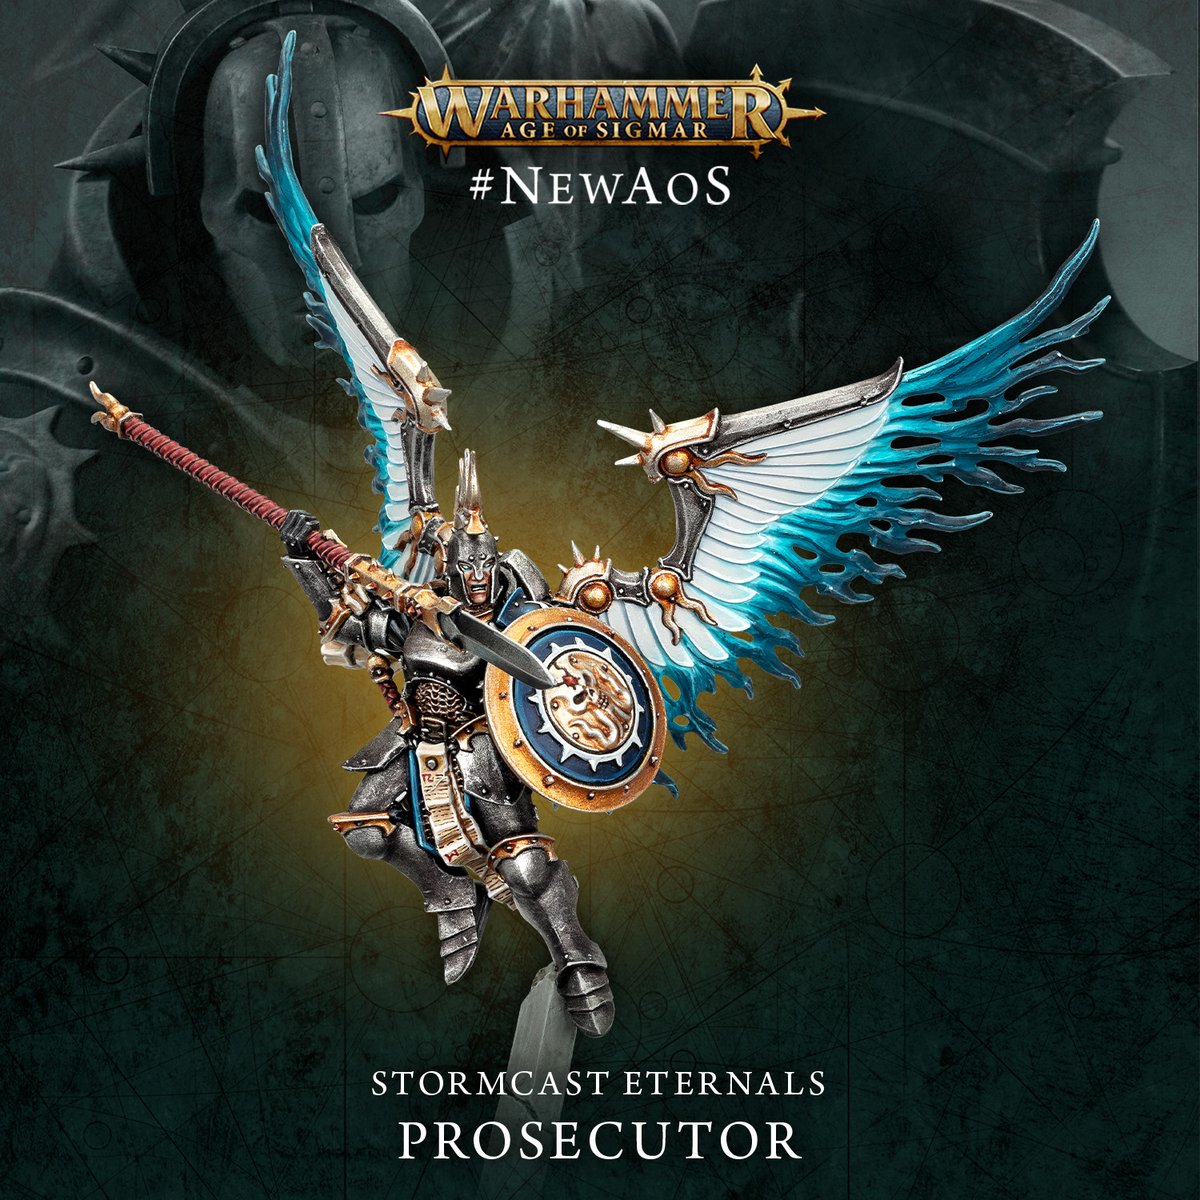 Big wings? Check. ✅ Bigger spear? Check. ✅ Stormcast Eternals Prosecutors take the fight to their enemies – get a closer look at their new miniatures: ow.ly/kx5R50RqveR #WarhammerCommunity #NewAoS